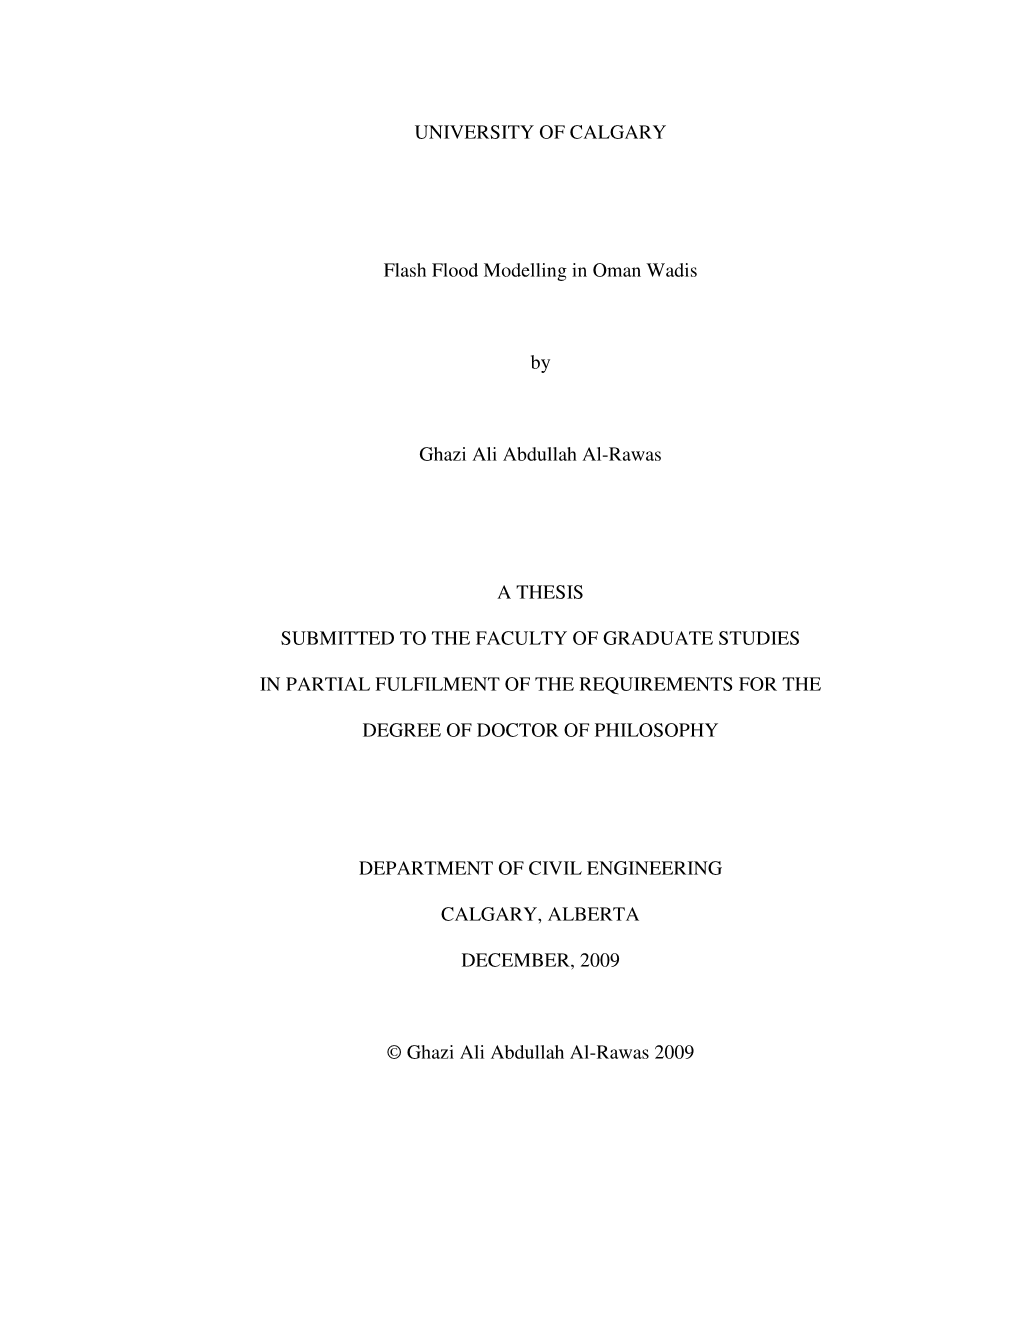 UNIVERSITY of CALGARY Flash Flood Modelling in Oman Wadis by Ghazi Ali Abdullah Al-Rawas a THESIS SUBMITTED to the FACULTY of GR